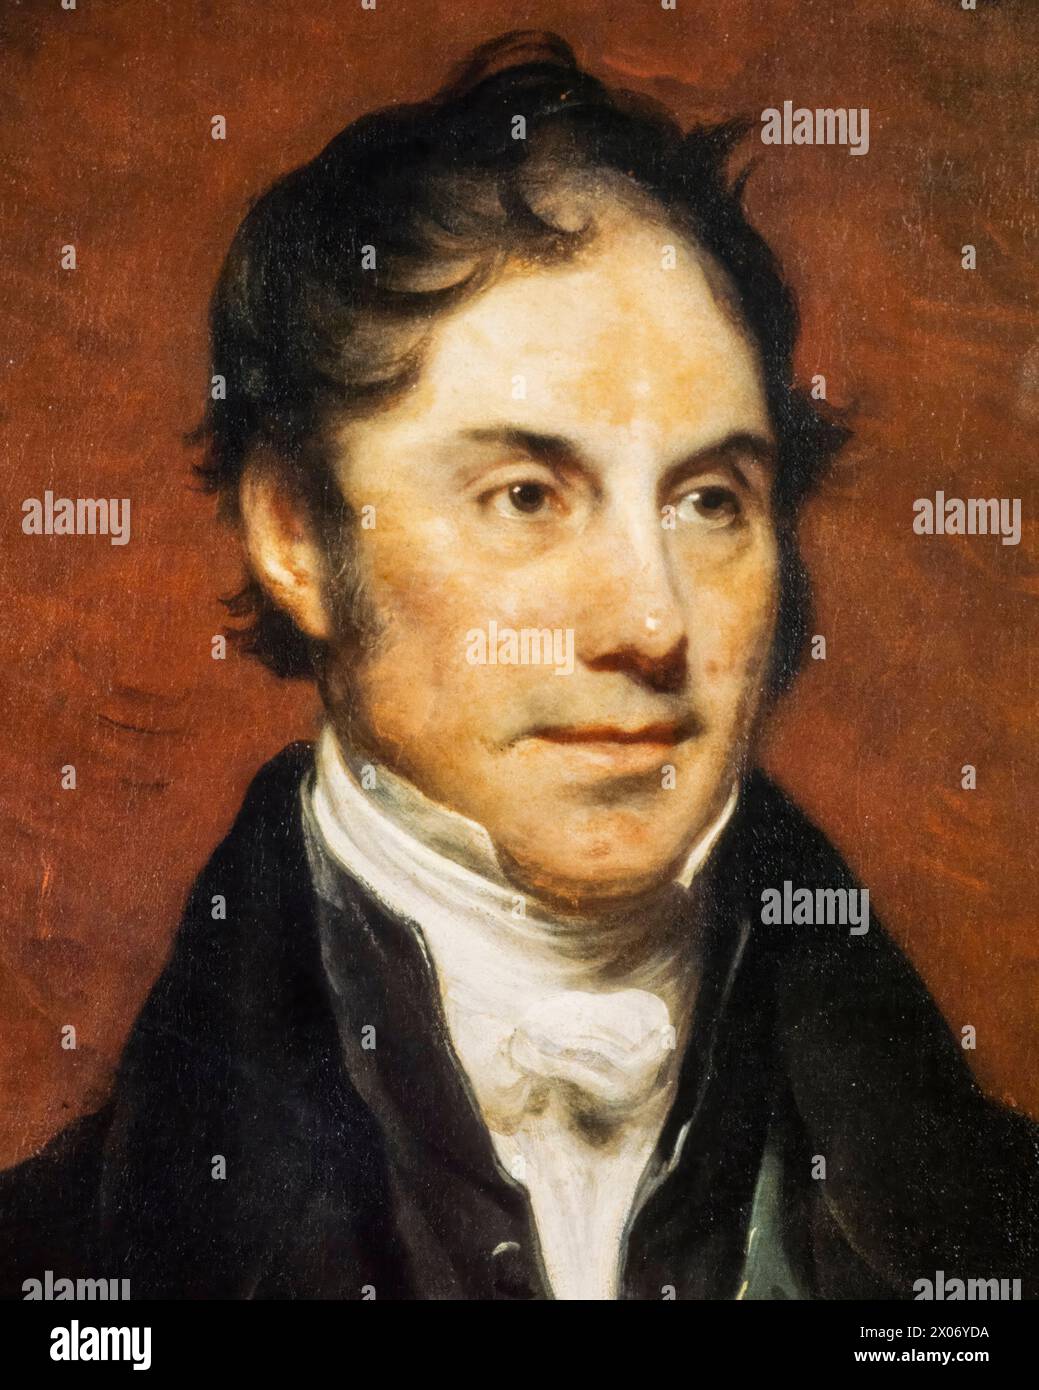 George Hamilton-Gordon, 4th Earl of Aberdeen (1784-1860), styled 'Lord Haddo', Prime Minister of the United Kingdom 1852-1855, portrait painting in oil on canvas by Sir Martin Archer Shee, circa 1838 Stock Photo